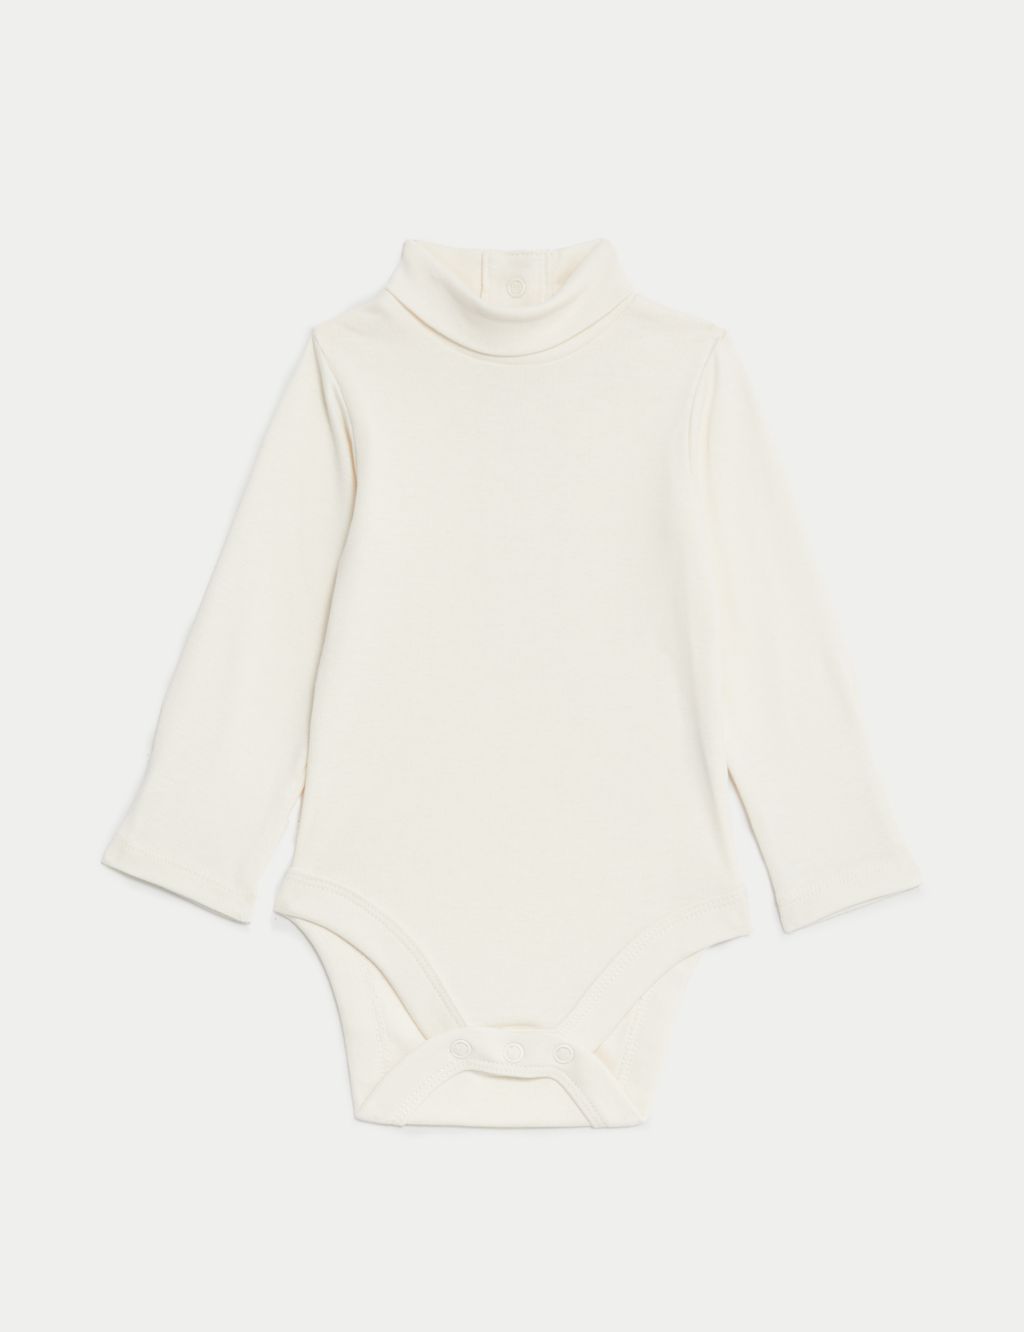 Baby Outfits | M&S